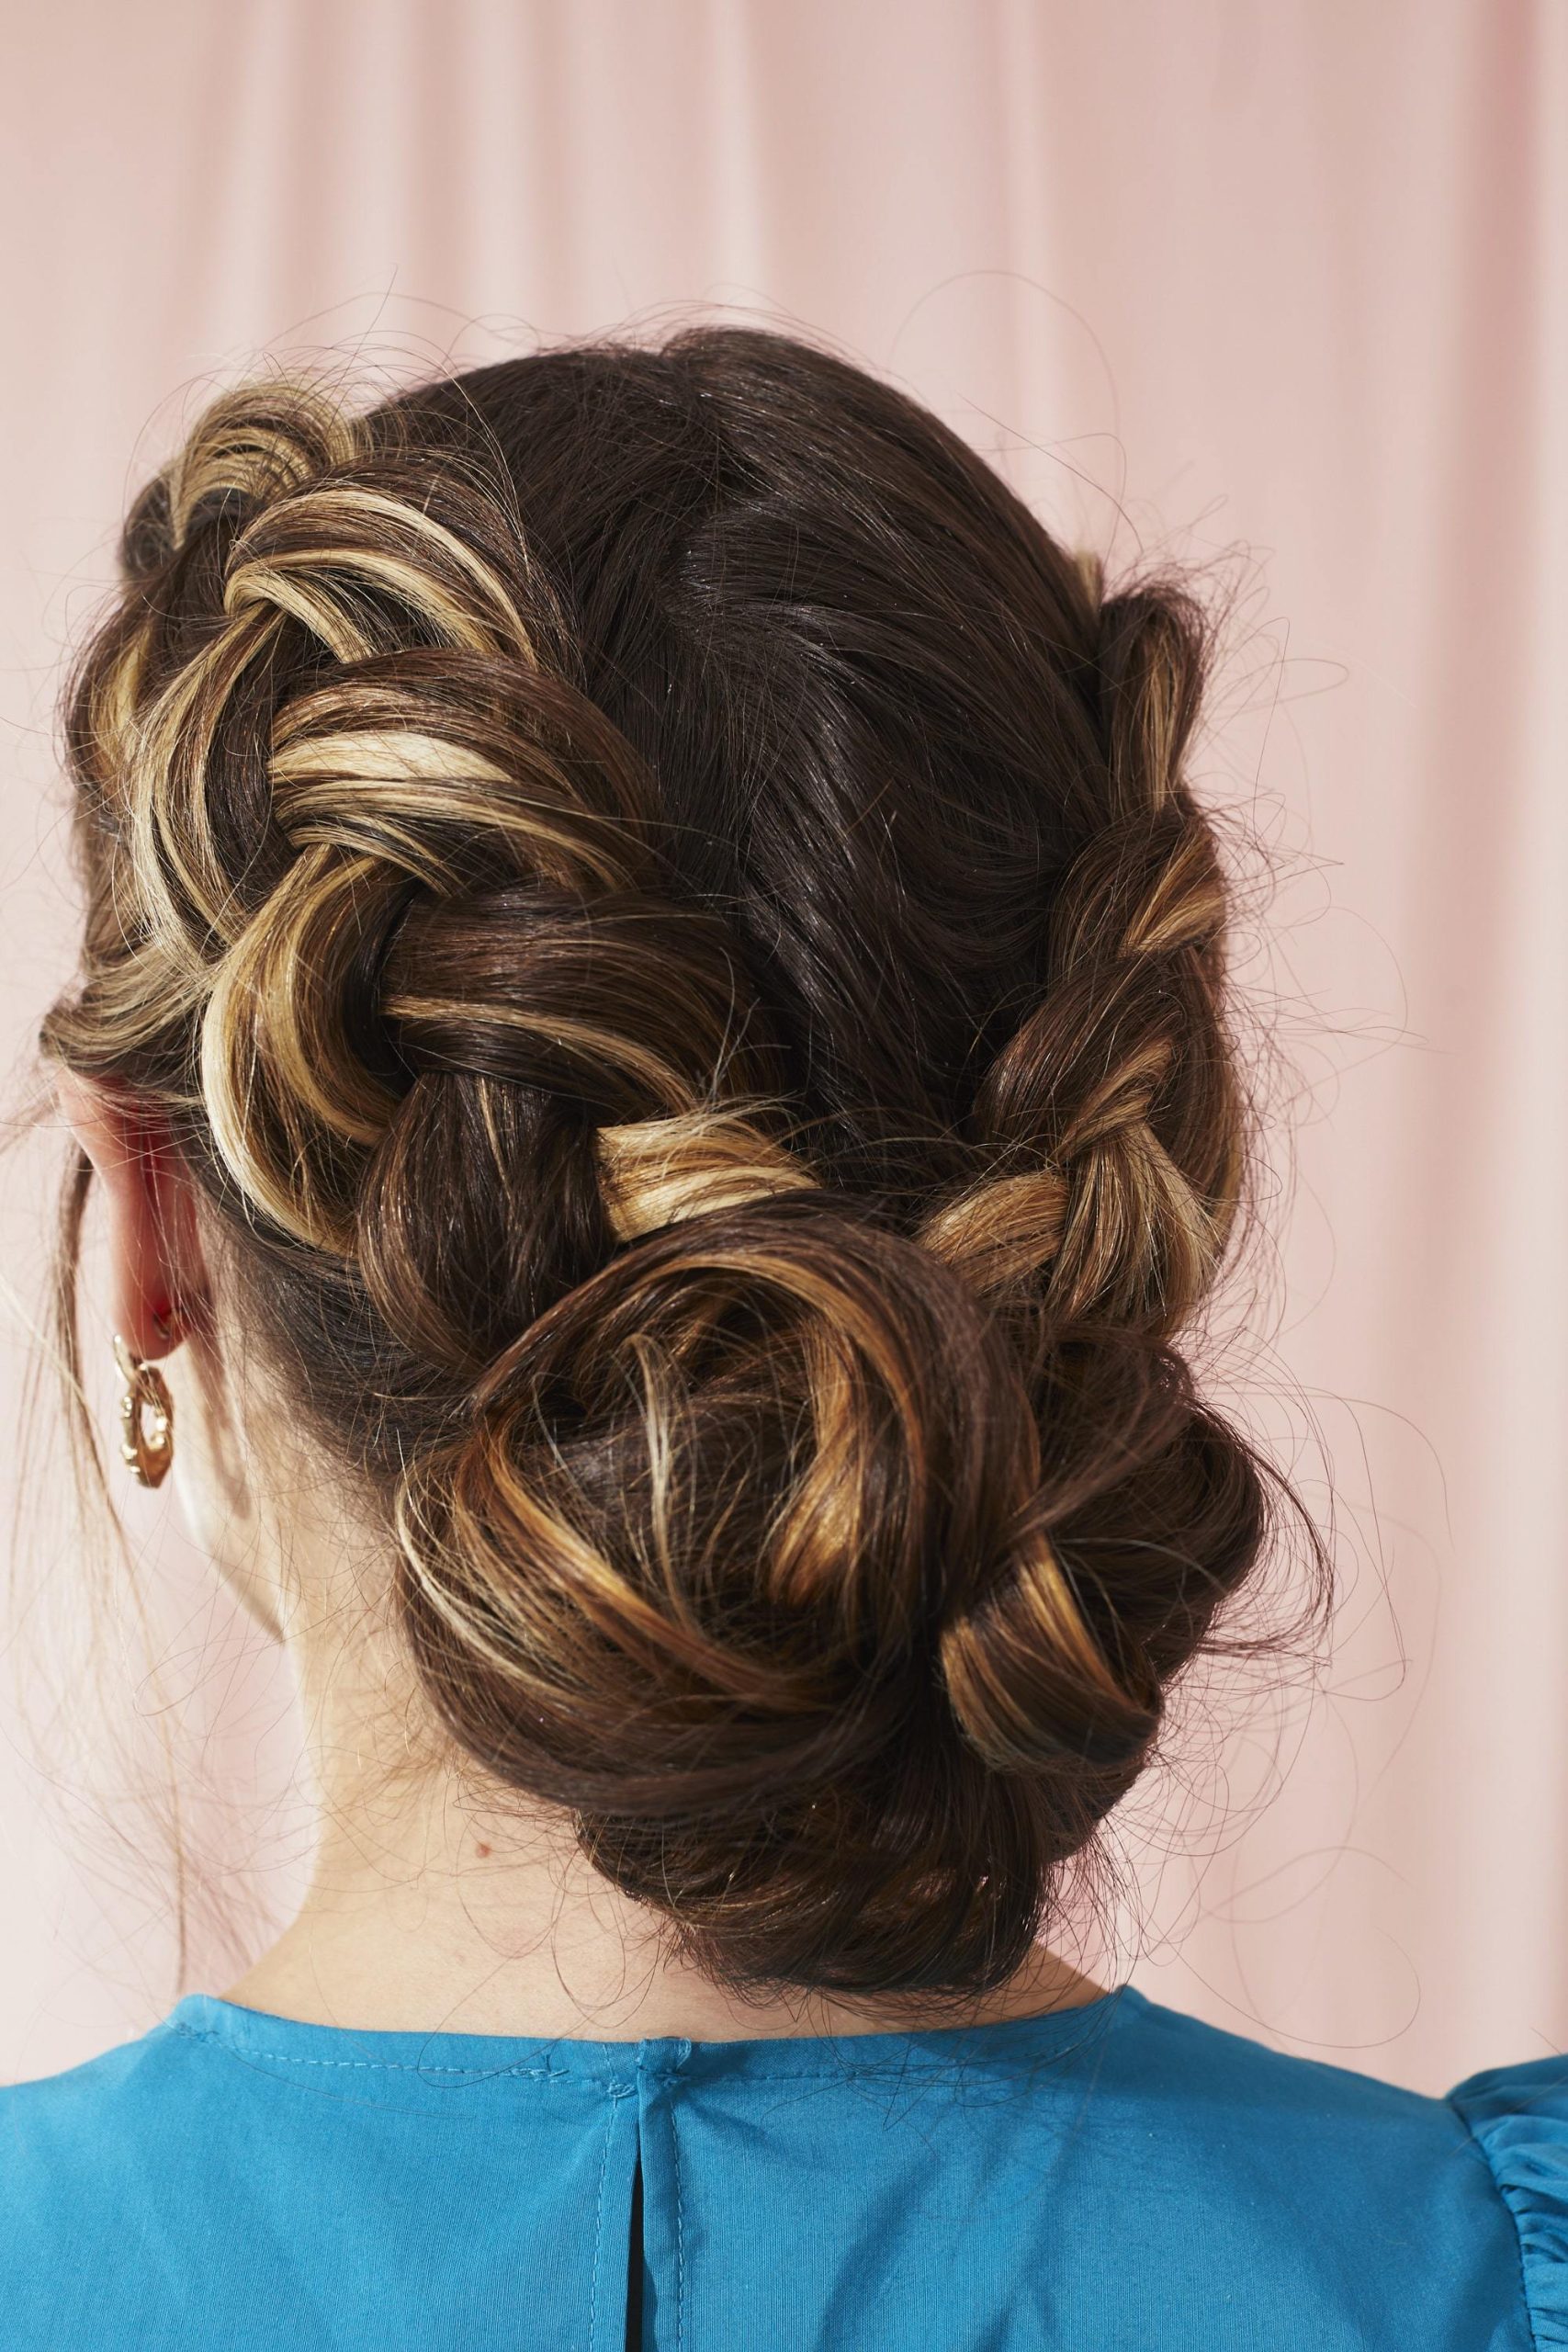 Chignons with a Twist- 30 Hairstyles That Will Add Flair to Your Look Top Beauty Magazines